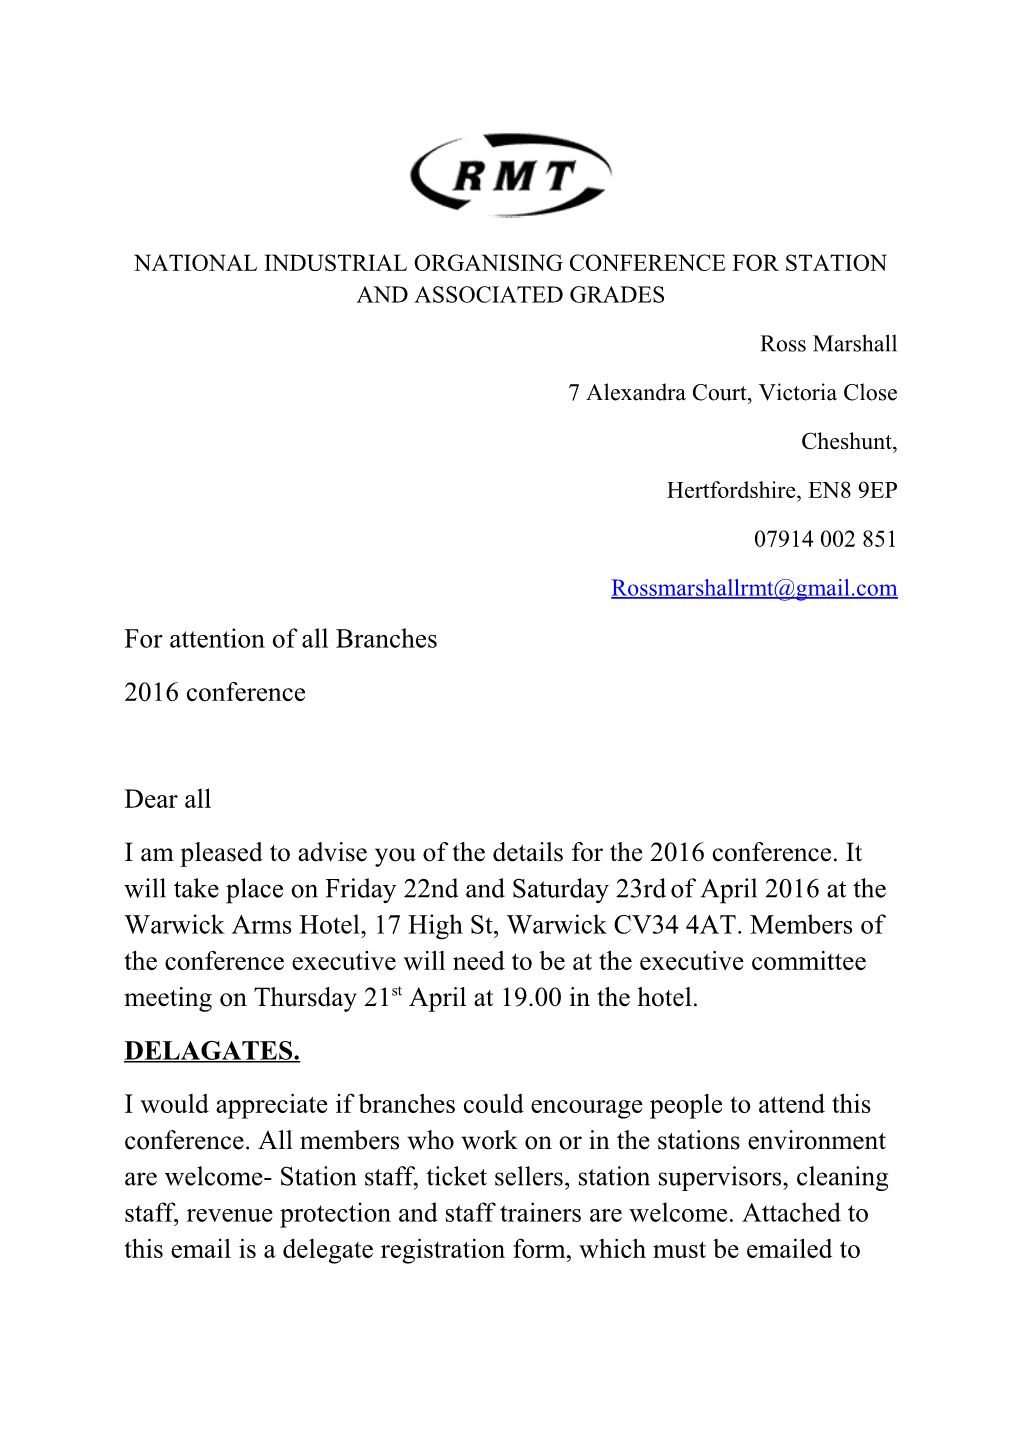 National Industrial Organising Conference for Station and Associated Grades